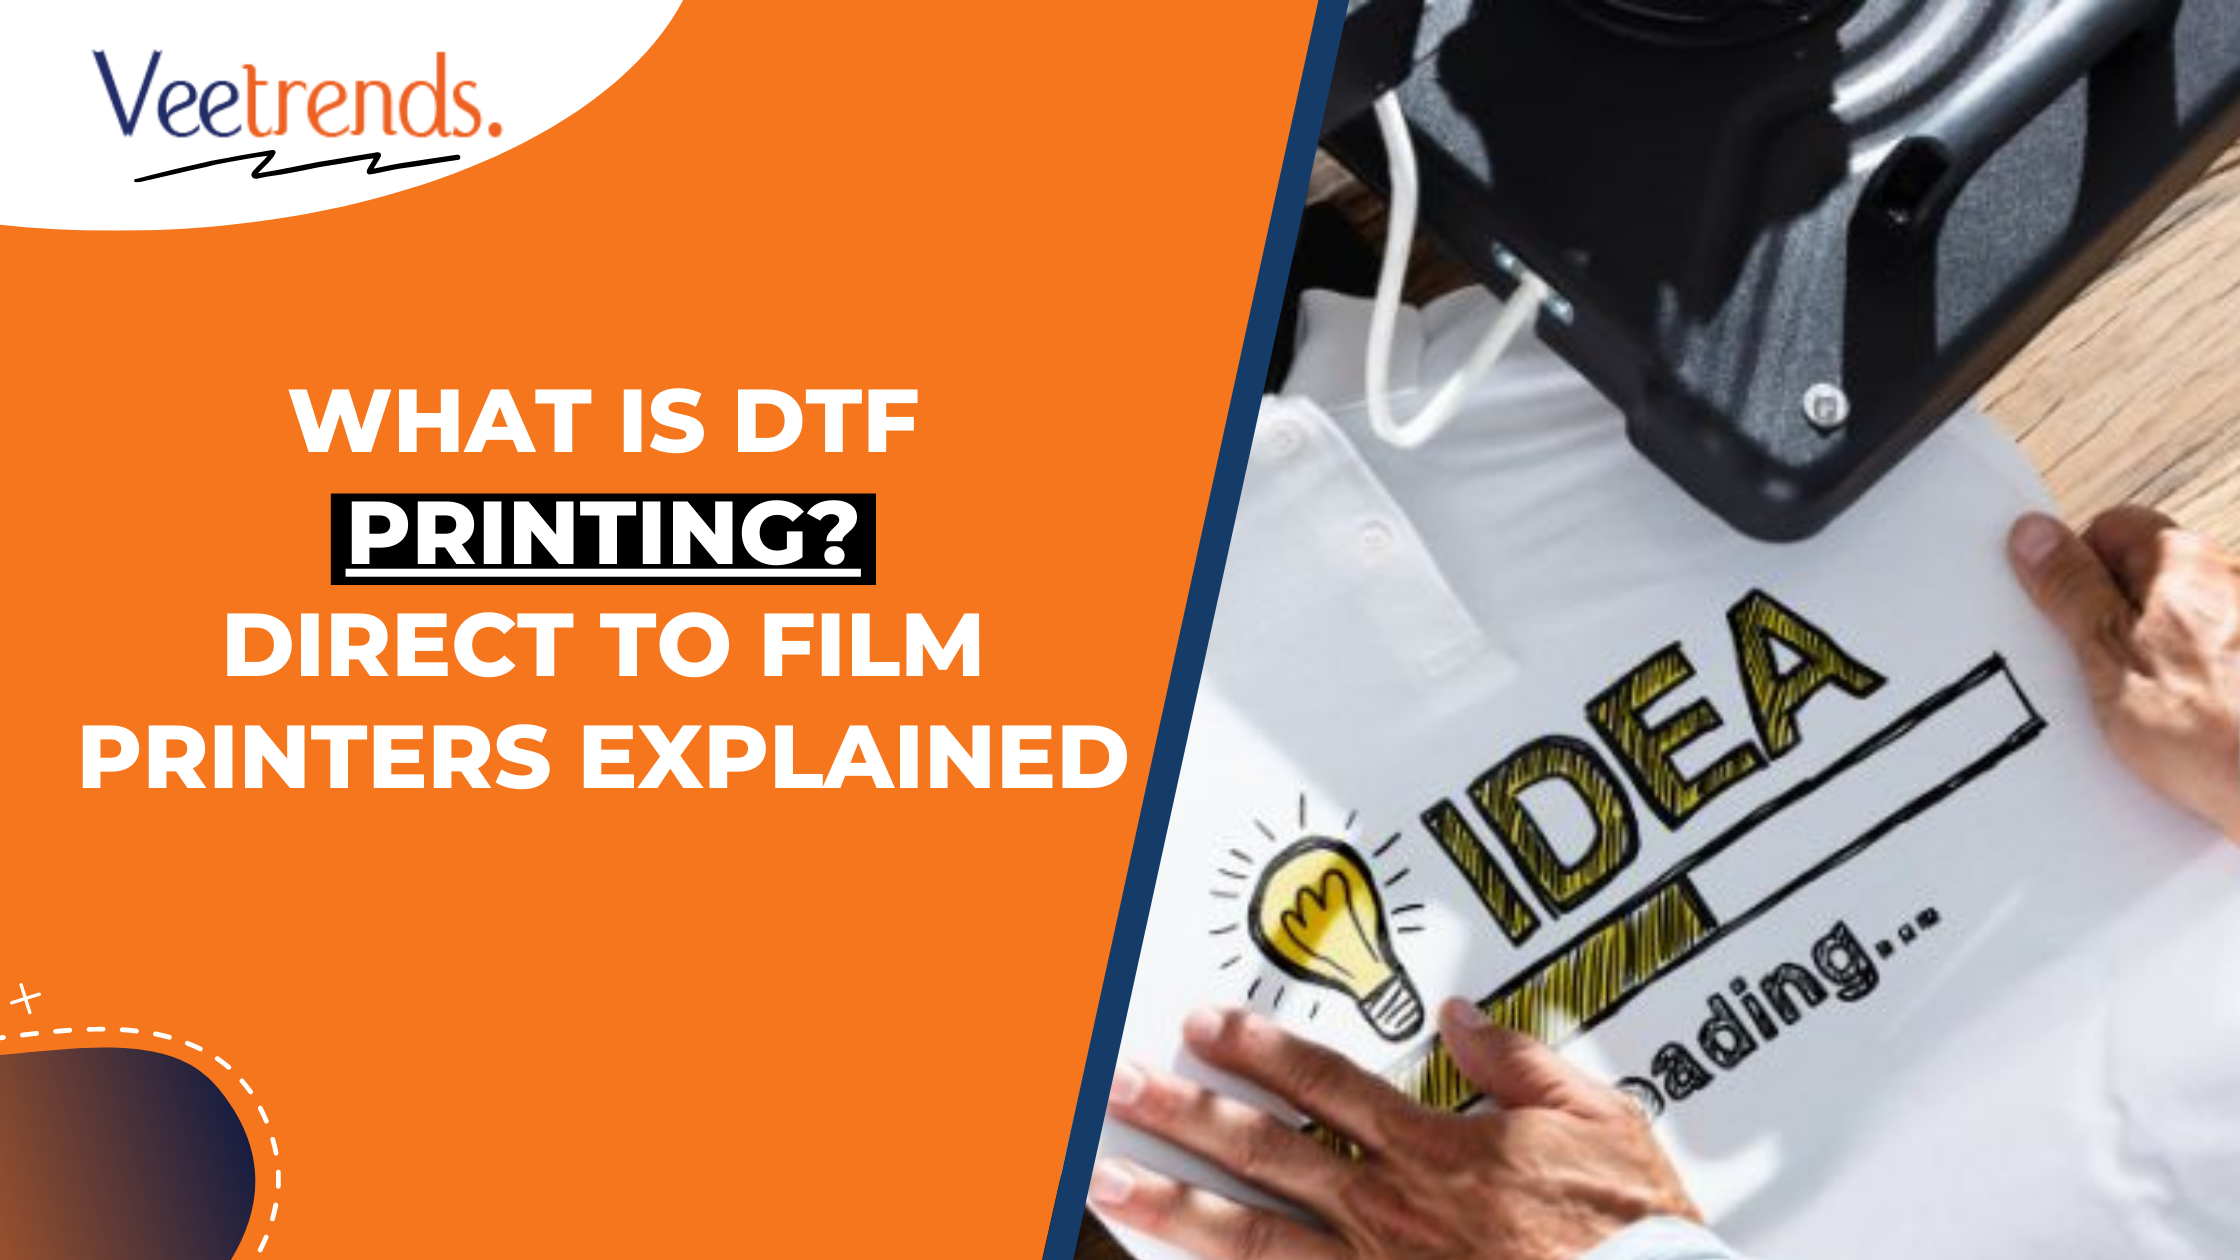 DTF printing or Screen printing - Which one to choose?